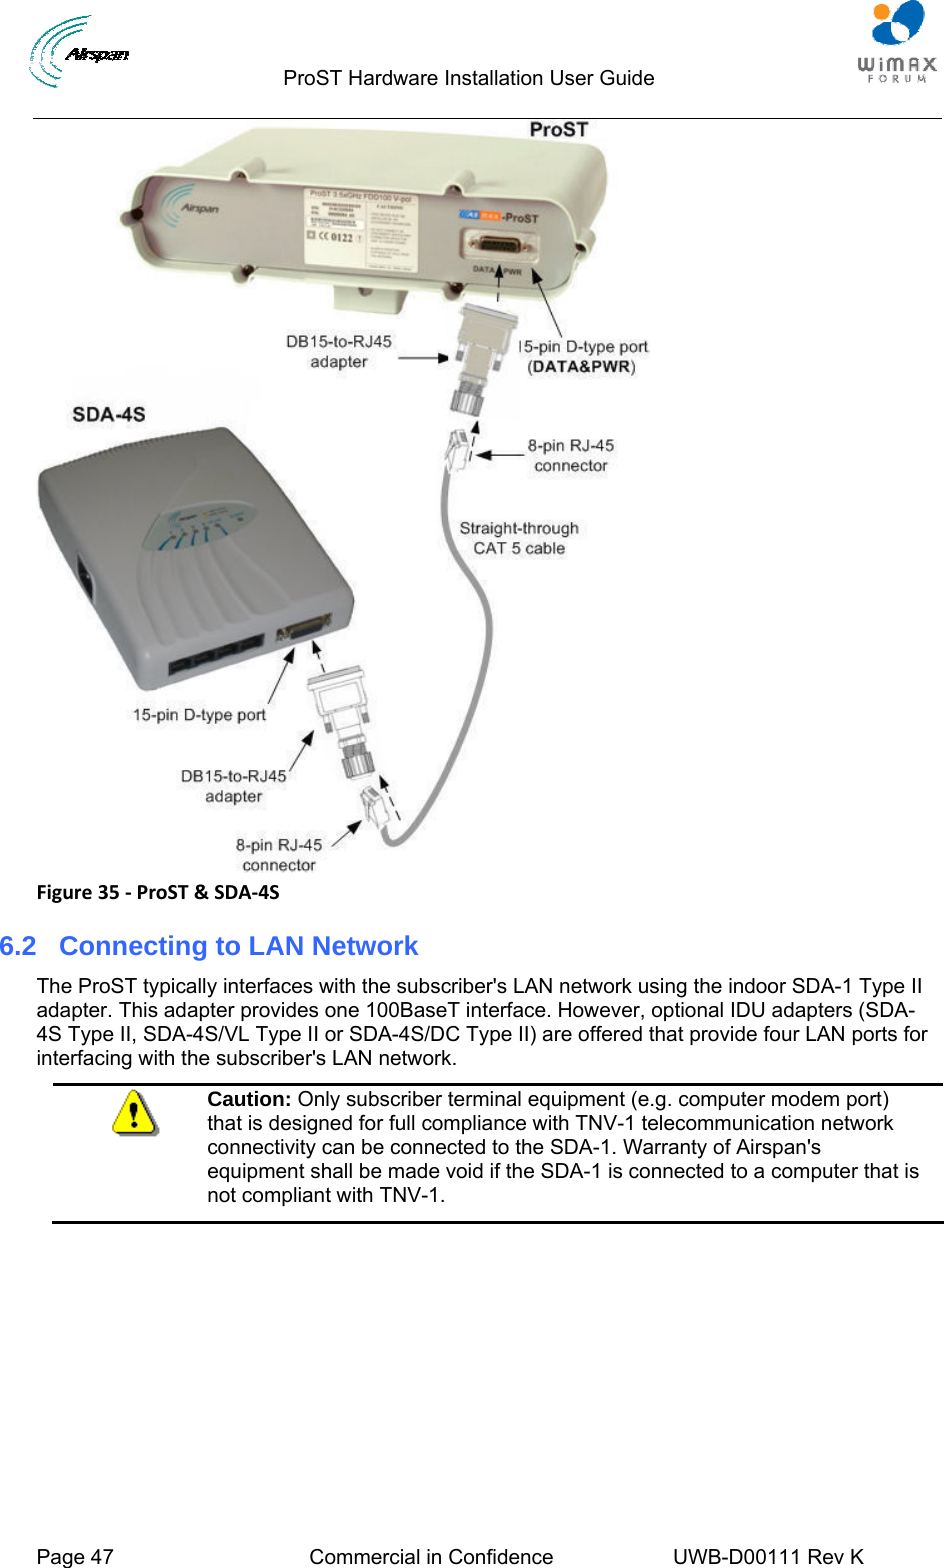                                  ProST Hardware Installation User Guide  Page 47  Commercial in Confidence  UWB-D00111 Rev K    Figure35‐ProST&amp;SDA‐4S6.2  Connecting to LAN Network The ProST typically interfaces with the subscriber&apos;s LAN network using the indoor SDA-1 Type II adapter. This adapter provides one 100BaseT interface. However, optional IDU adapters (SDA-4S Type II, SDA-4S/VL Type II or SDA-4S/DC Type II) are offered that provide four LAN ports for interfacing with the subscriber&apos;s LAN network.  Caution: Only subscriber terminal equipment (e.g. computer modem port) that is designed for full compliance with TNV-1 telecommunication network connectivity can be connected to the SDA-1. Warranty of Airspan&apos;s equipment shall be made void if the SDA-1 is connected to a computer that is not compliant with TNV-1.  